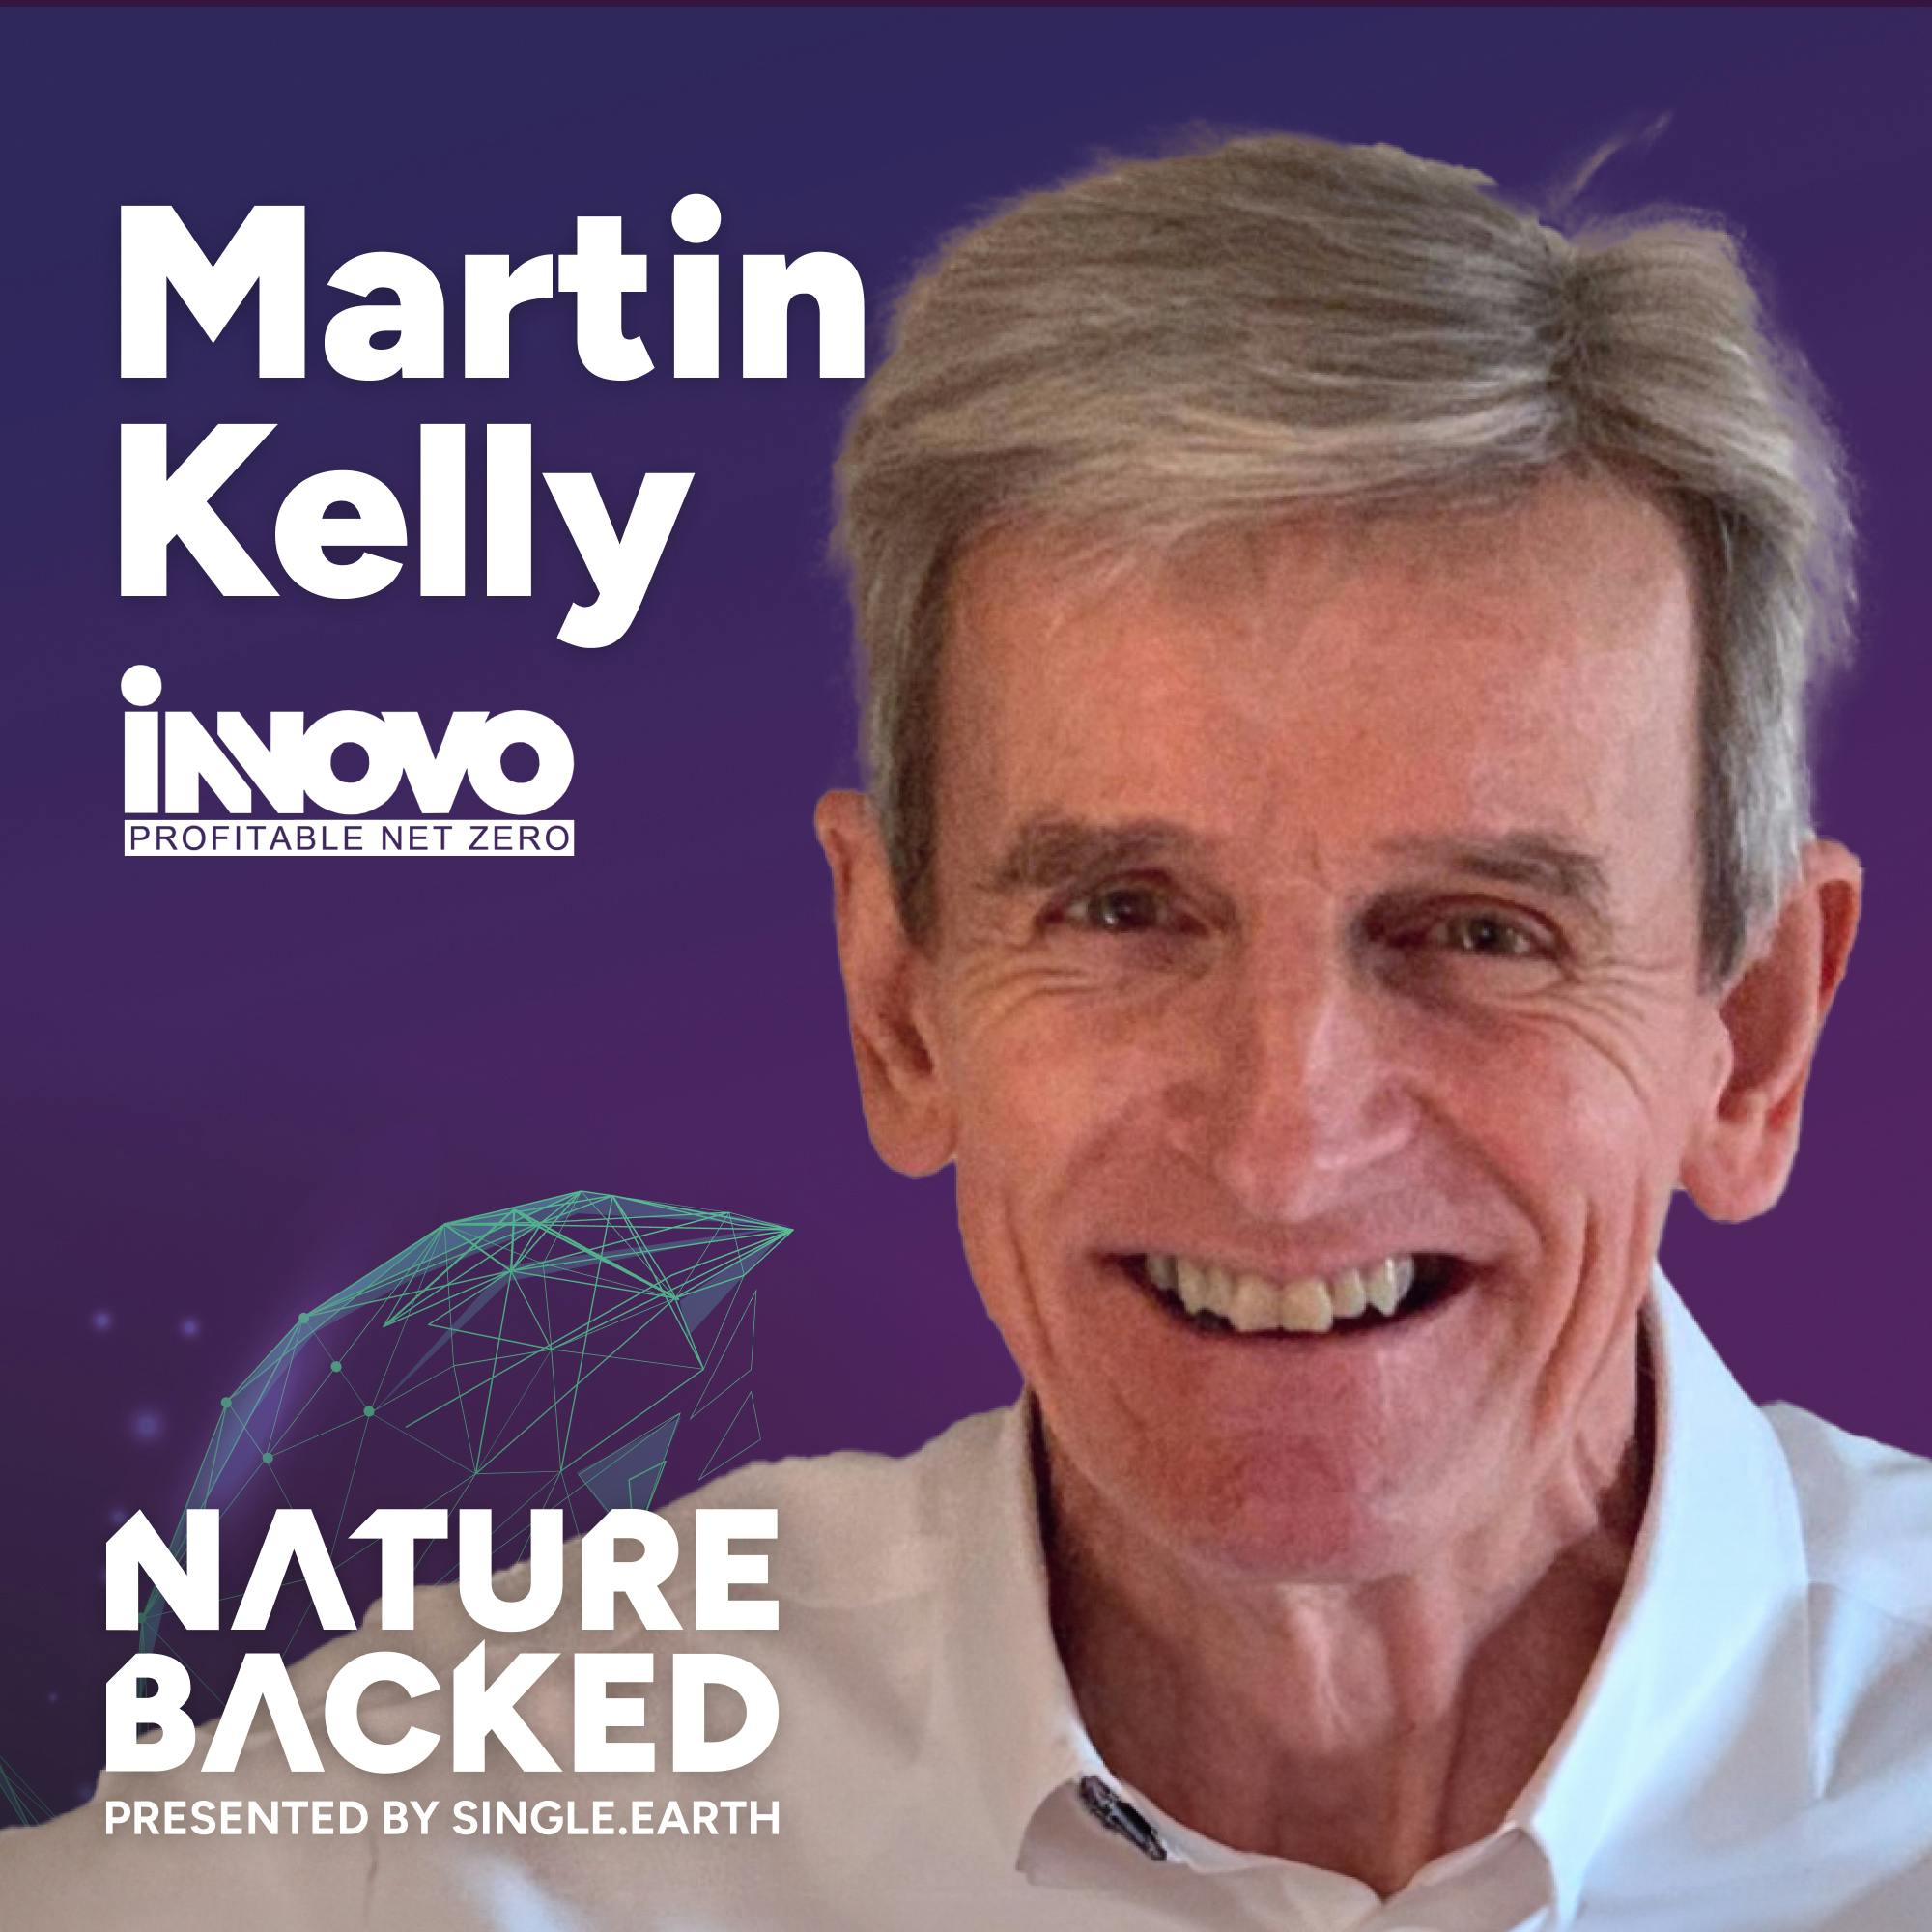 From Deserts To Dividends: Innovo’s Martin Kelly Talks About Profits and Algae